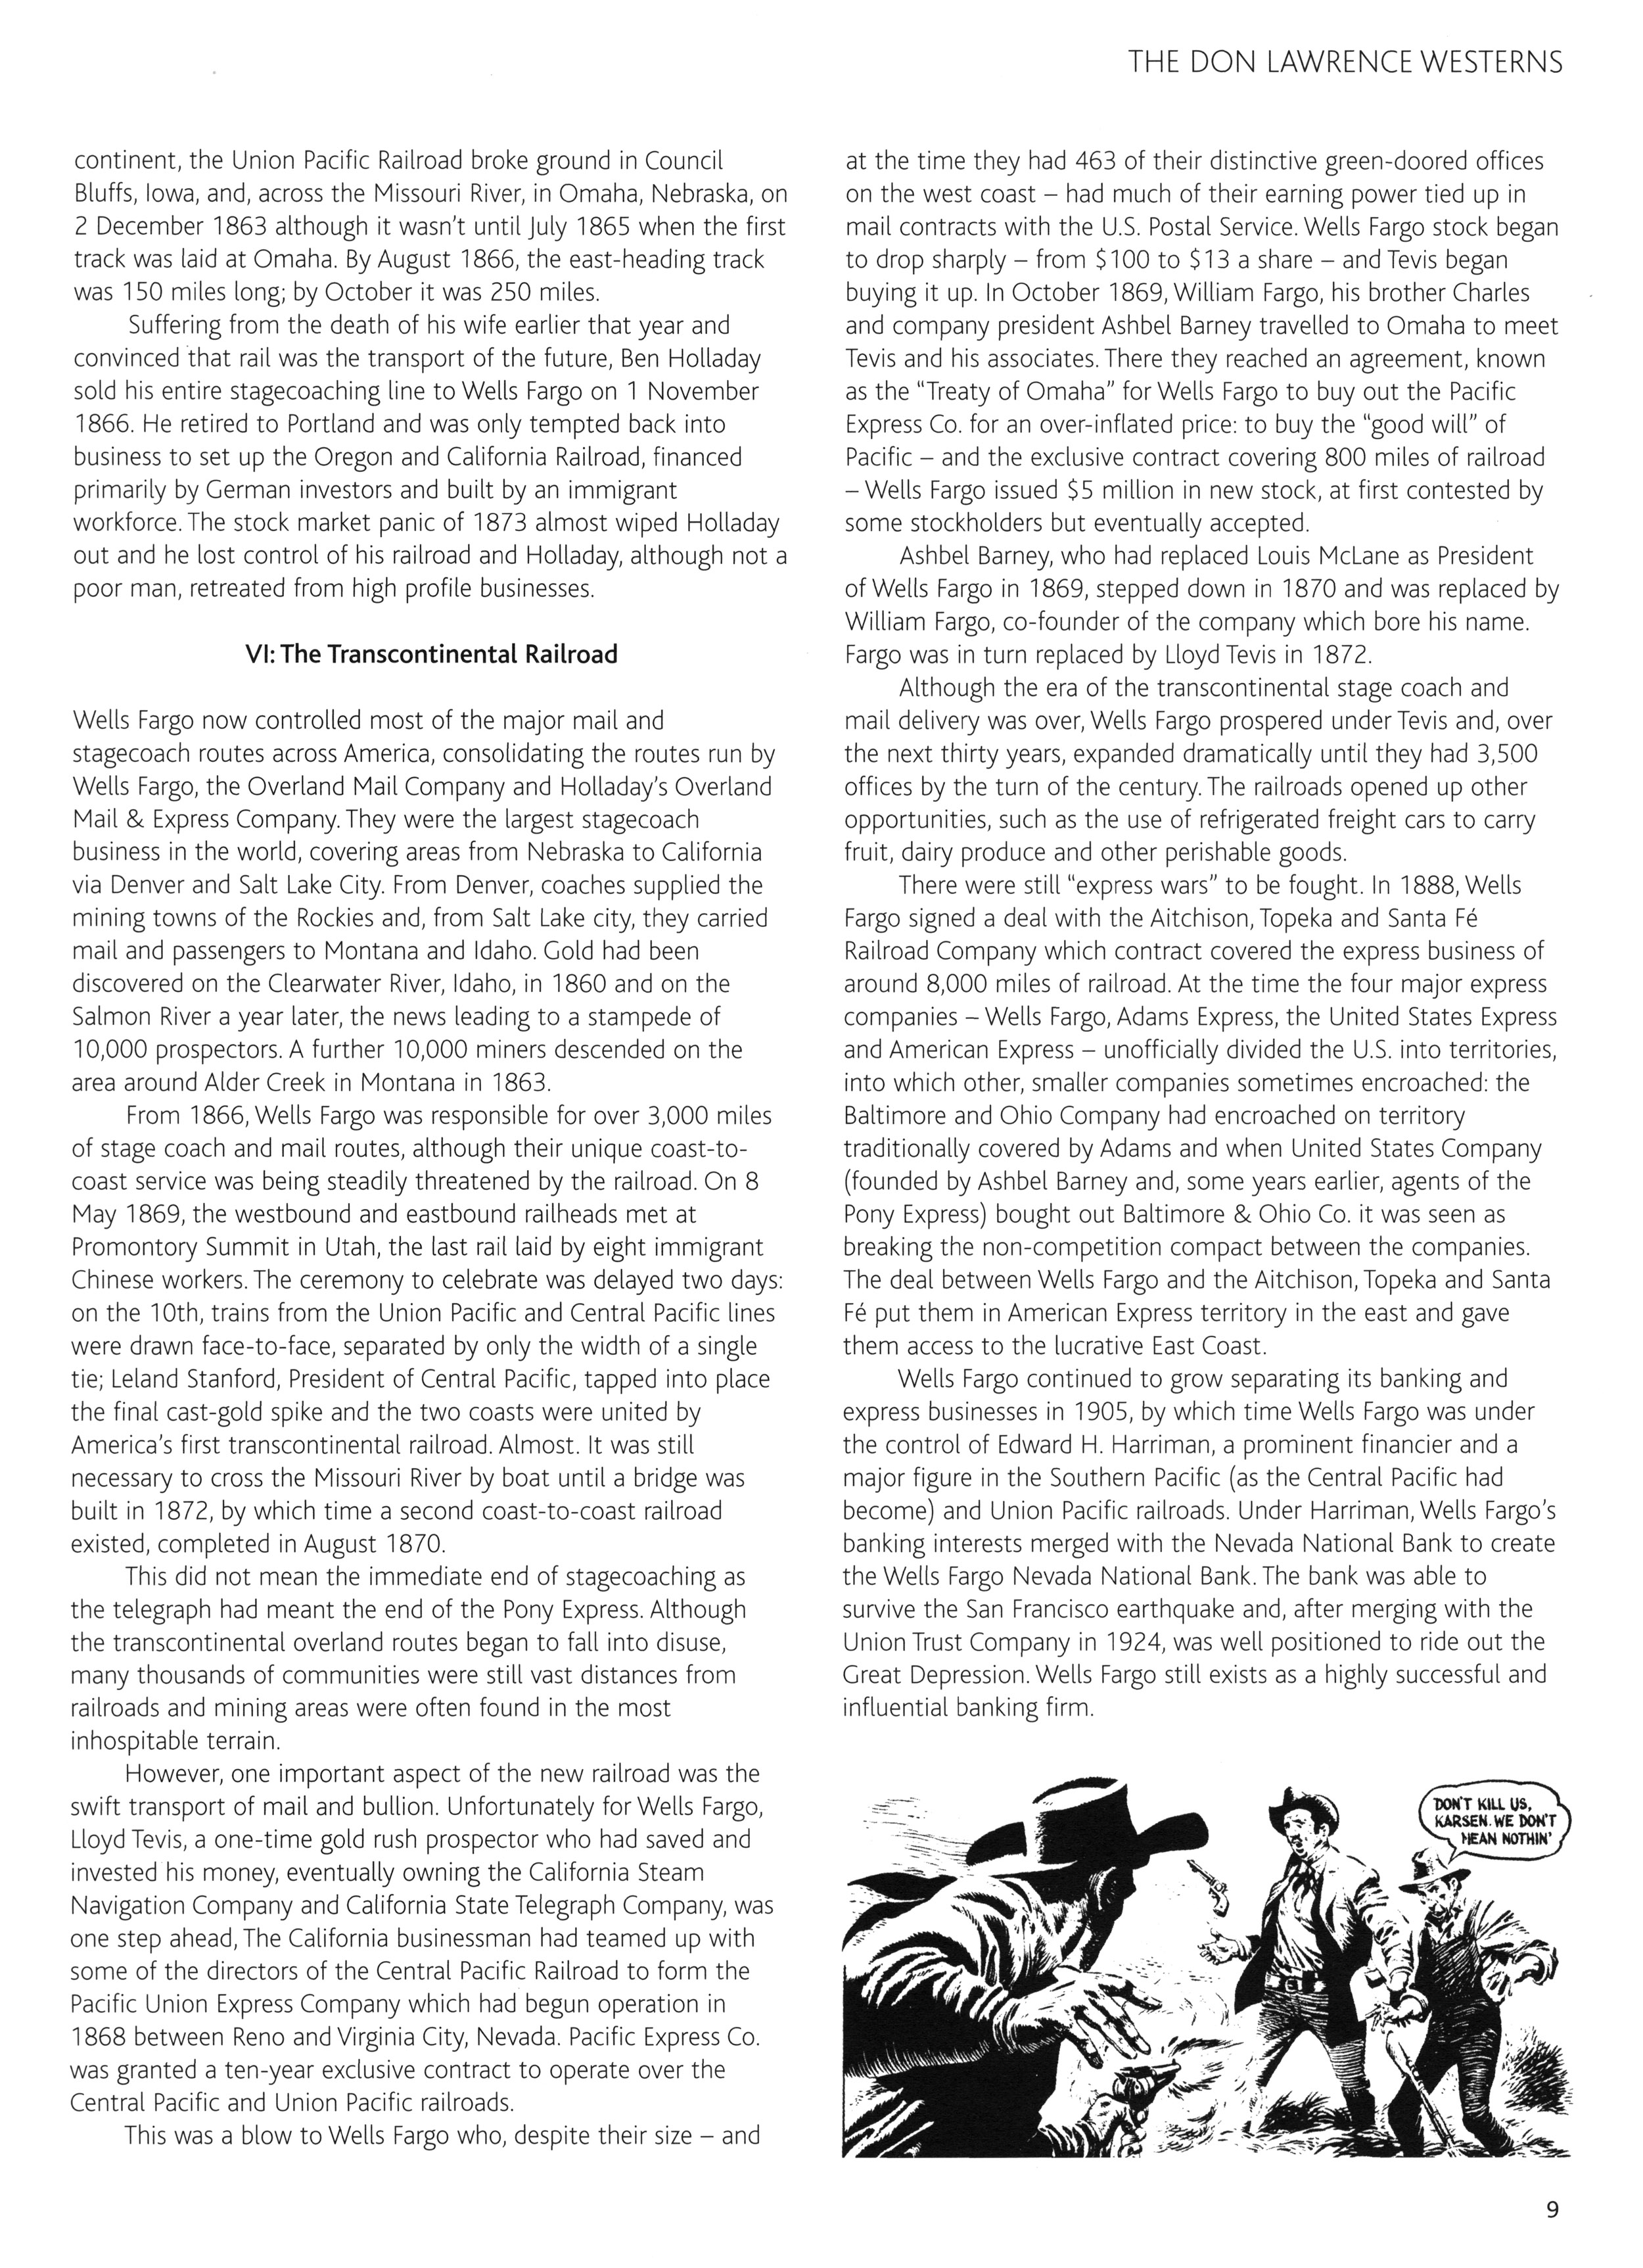 Read online Don Lawrence Westerns comic -  Issue # TPB (Part 1) - 13